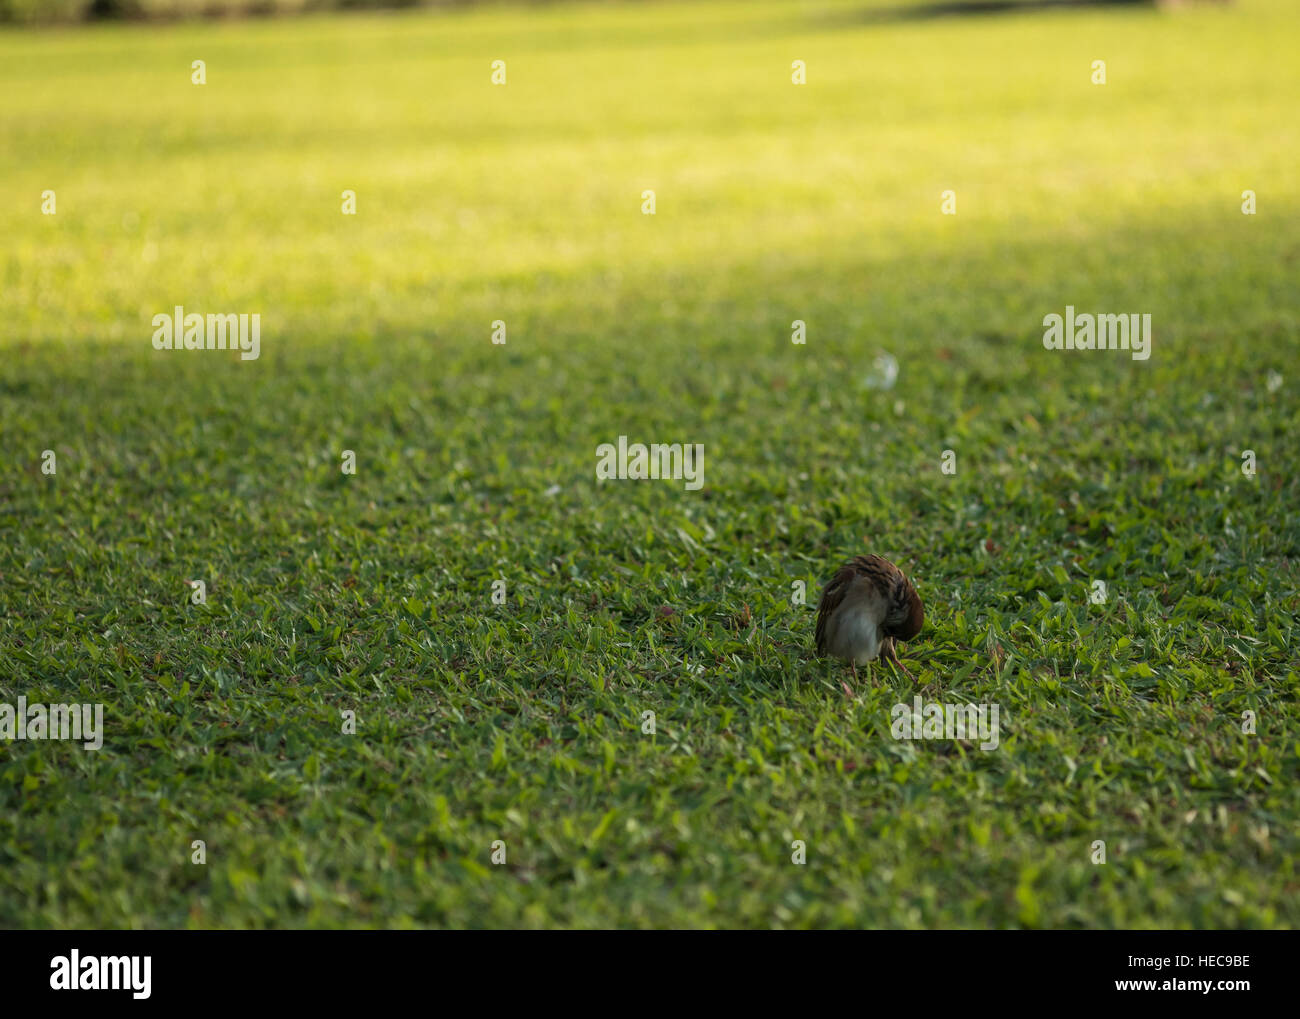 sparrow stand on the grass with copy space Stock Photo